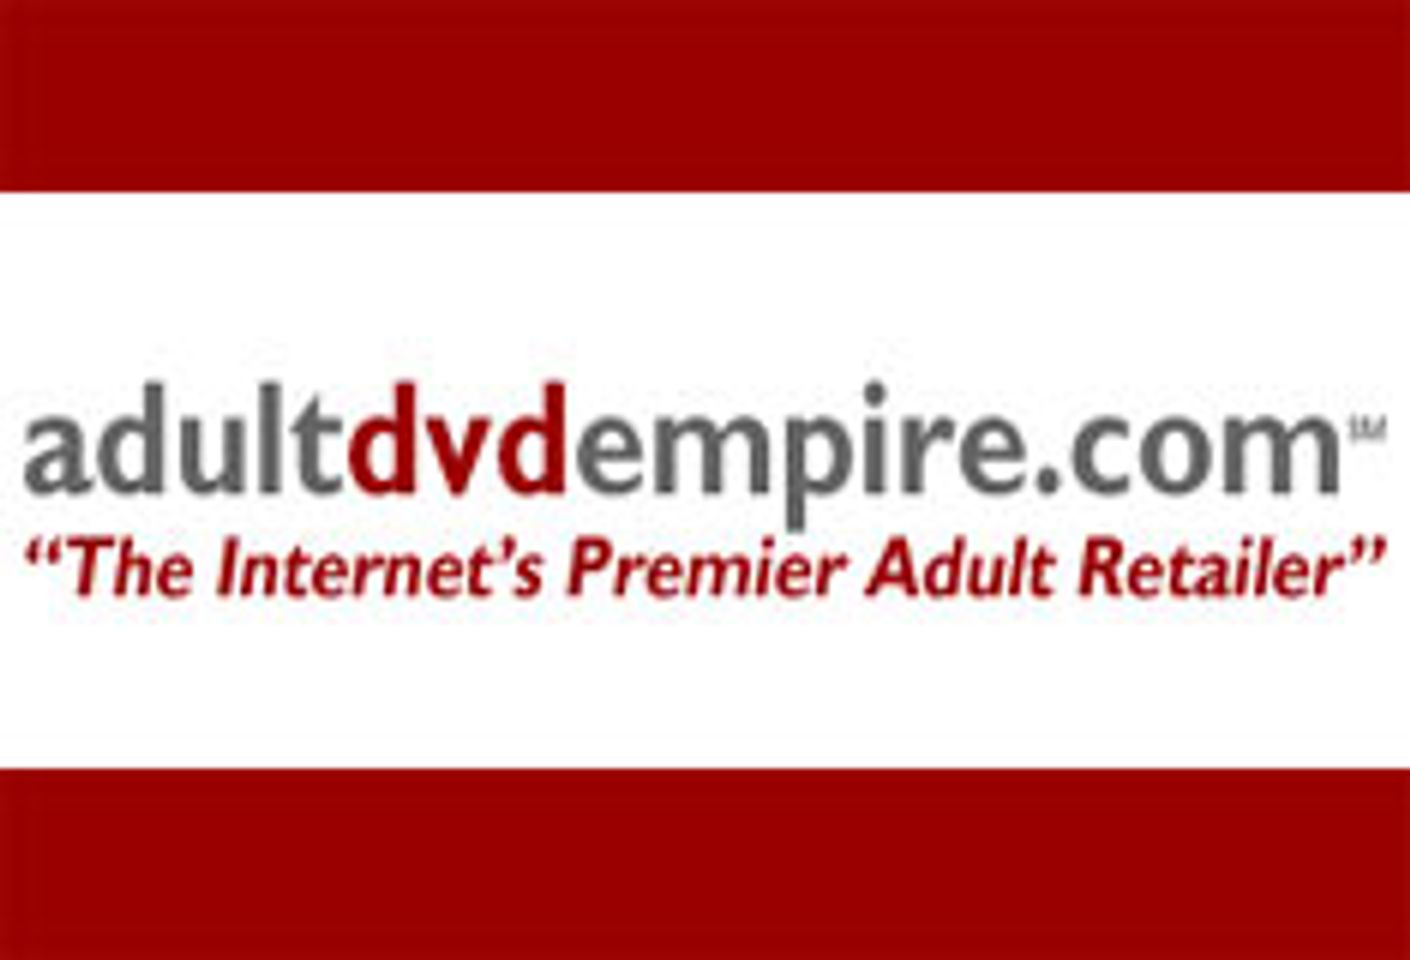 Adult DVD Empire Reports Record Sales